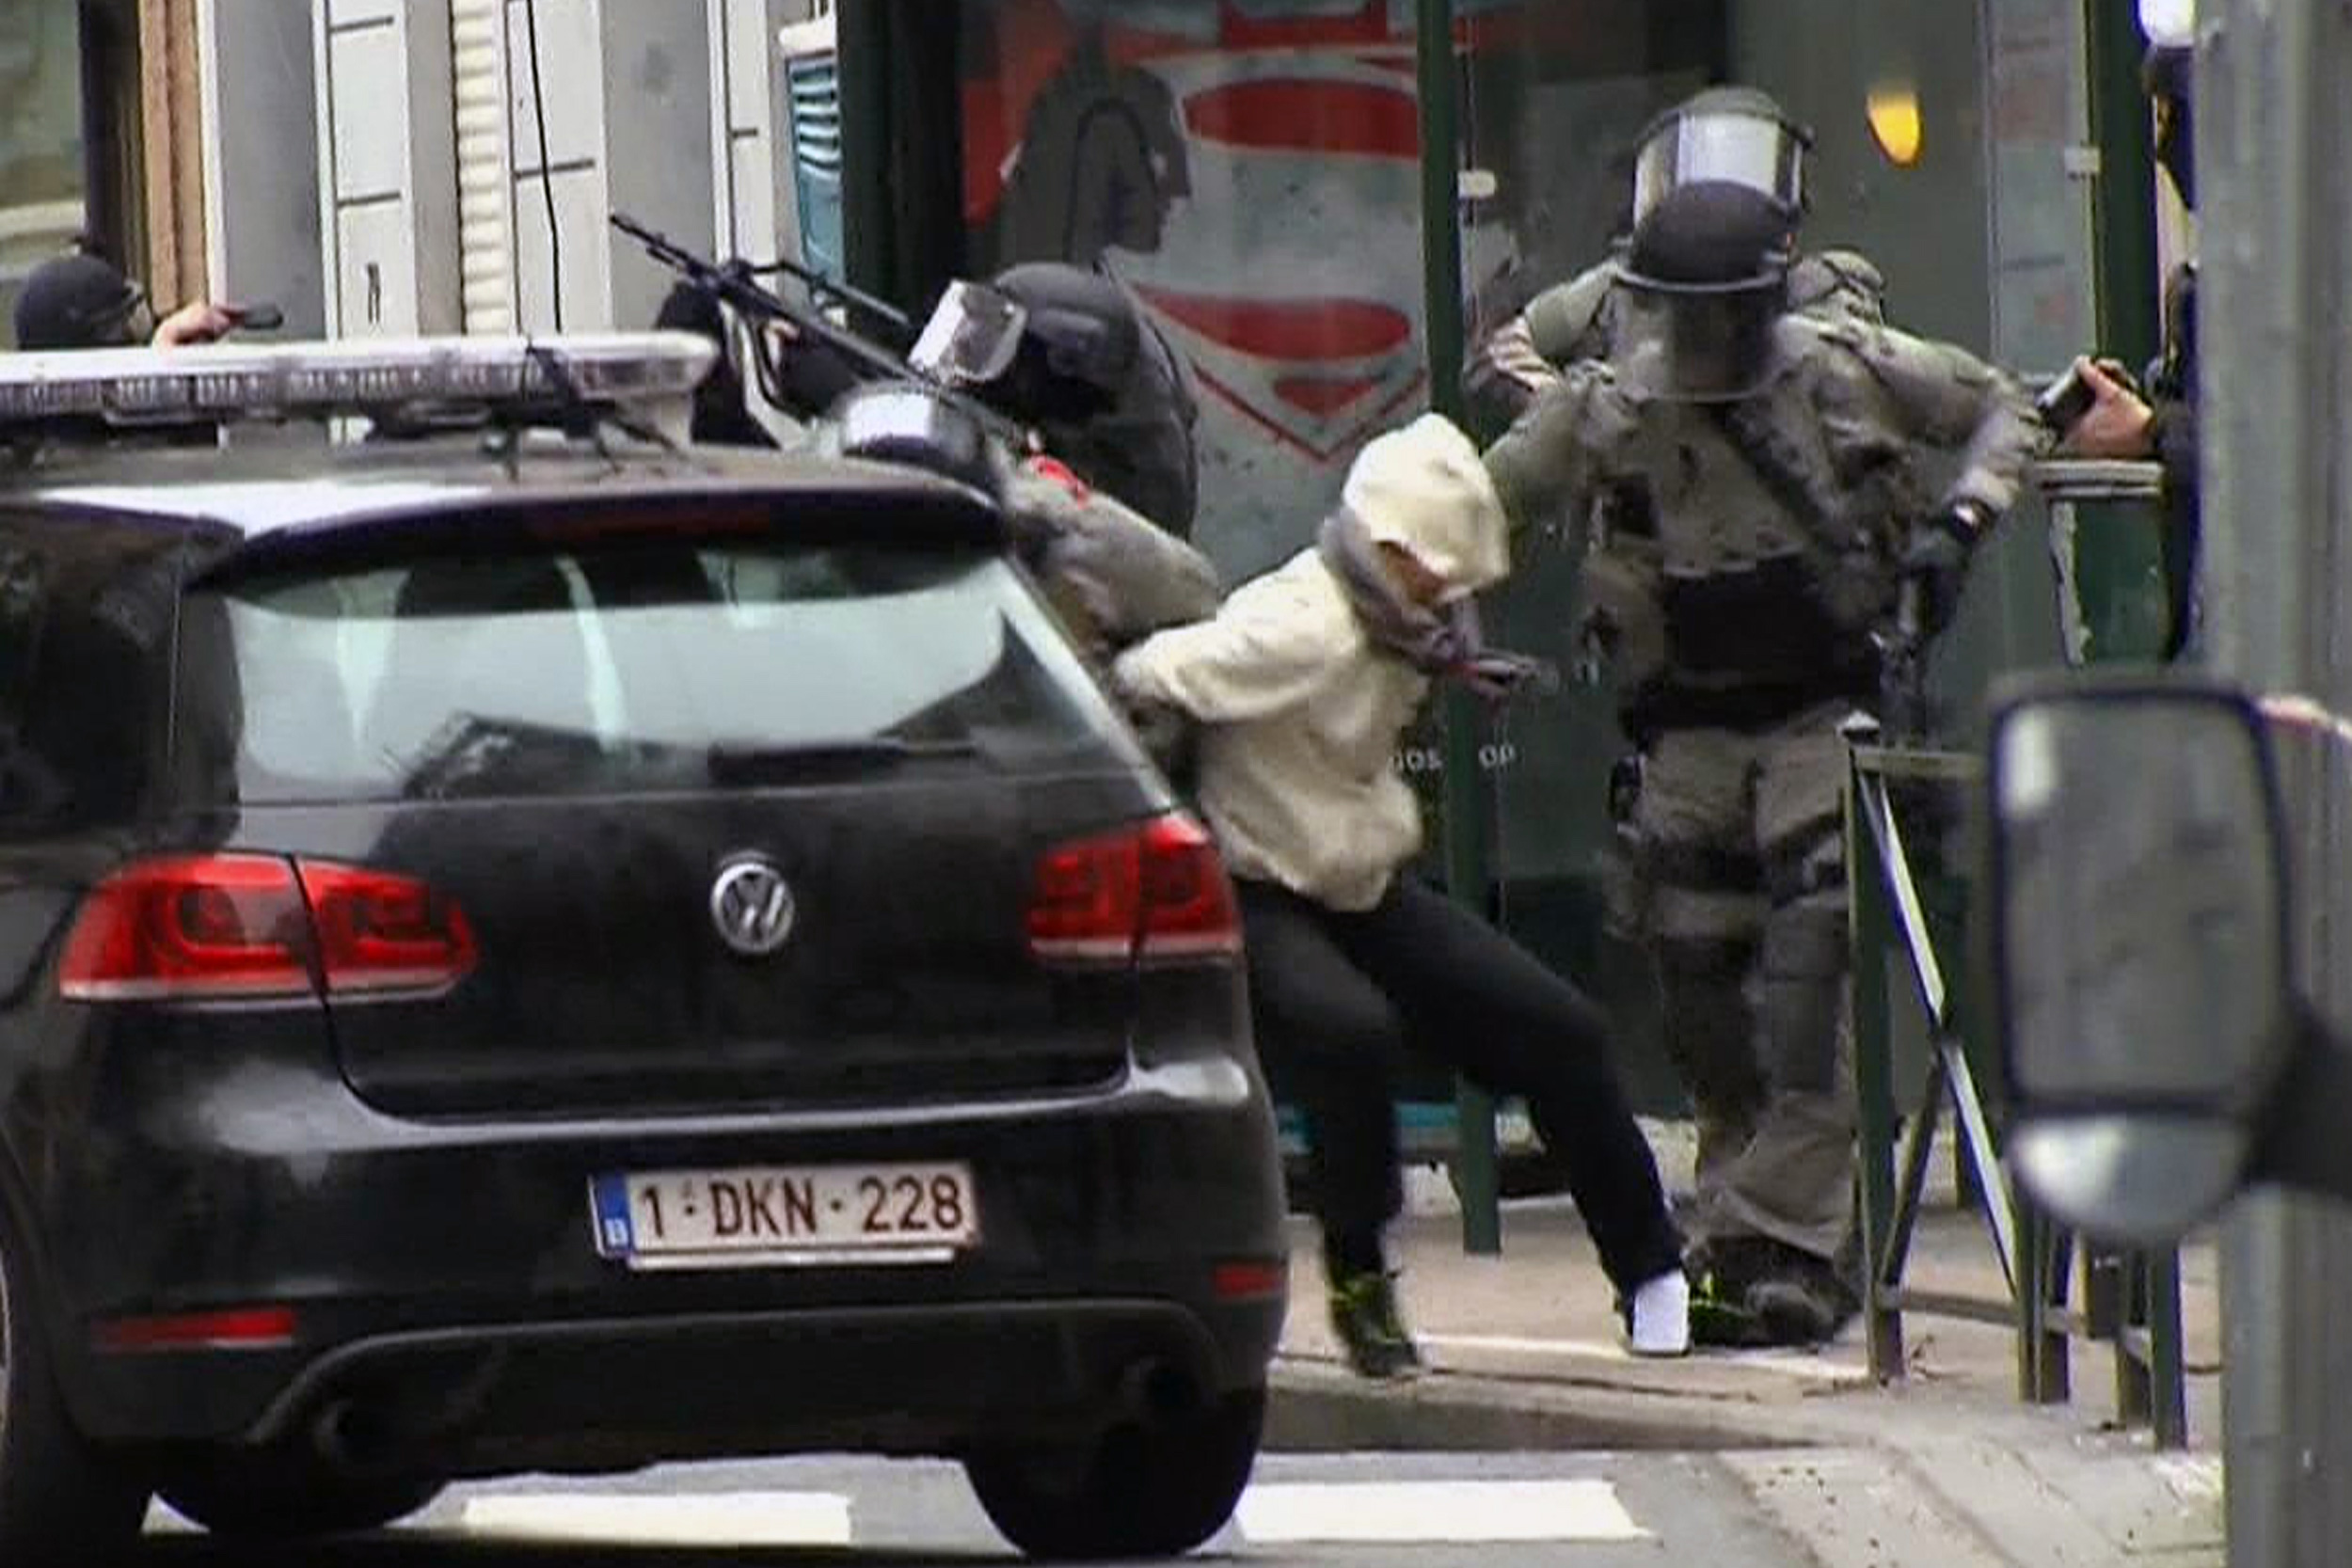 In this framegrab taken from VTM, something appears to drop from inside the pant leg of Salah Abdeslam as he is arrested by police during a raid in the Molenbeek neighborhood of Brussels, Belgium, March 18, 2016. (VTM/AP)